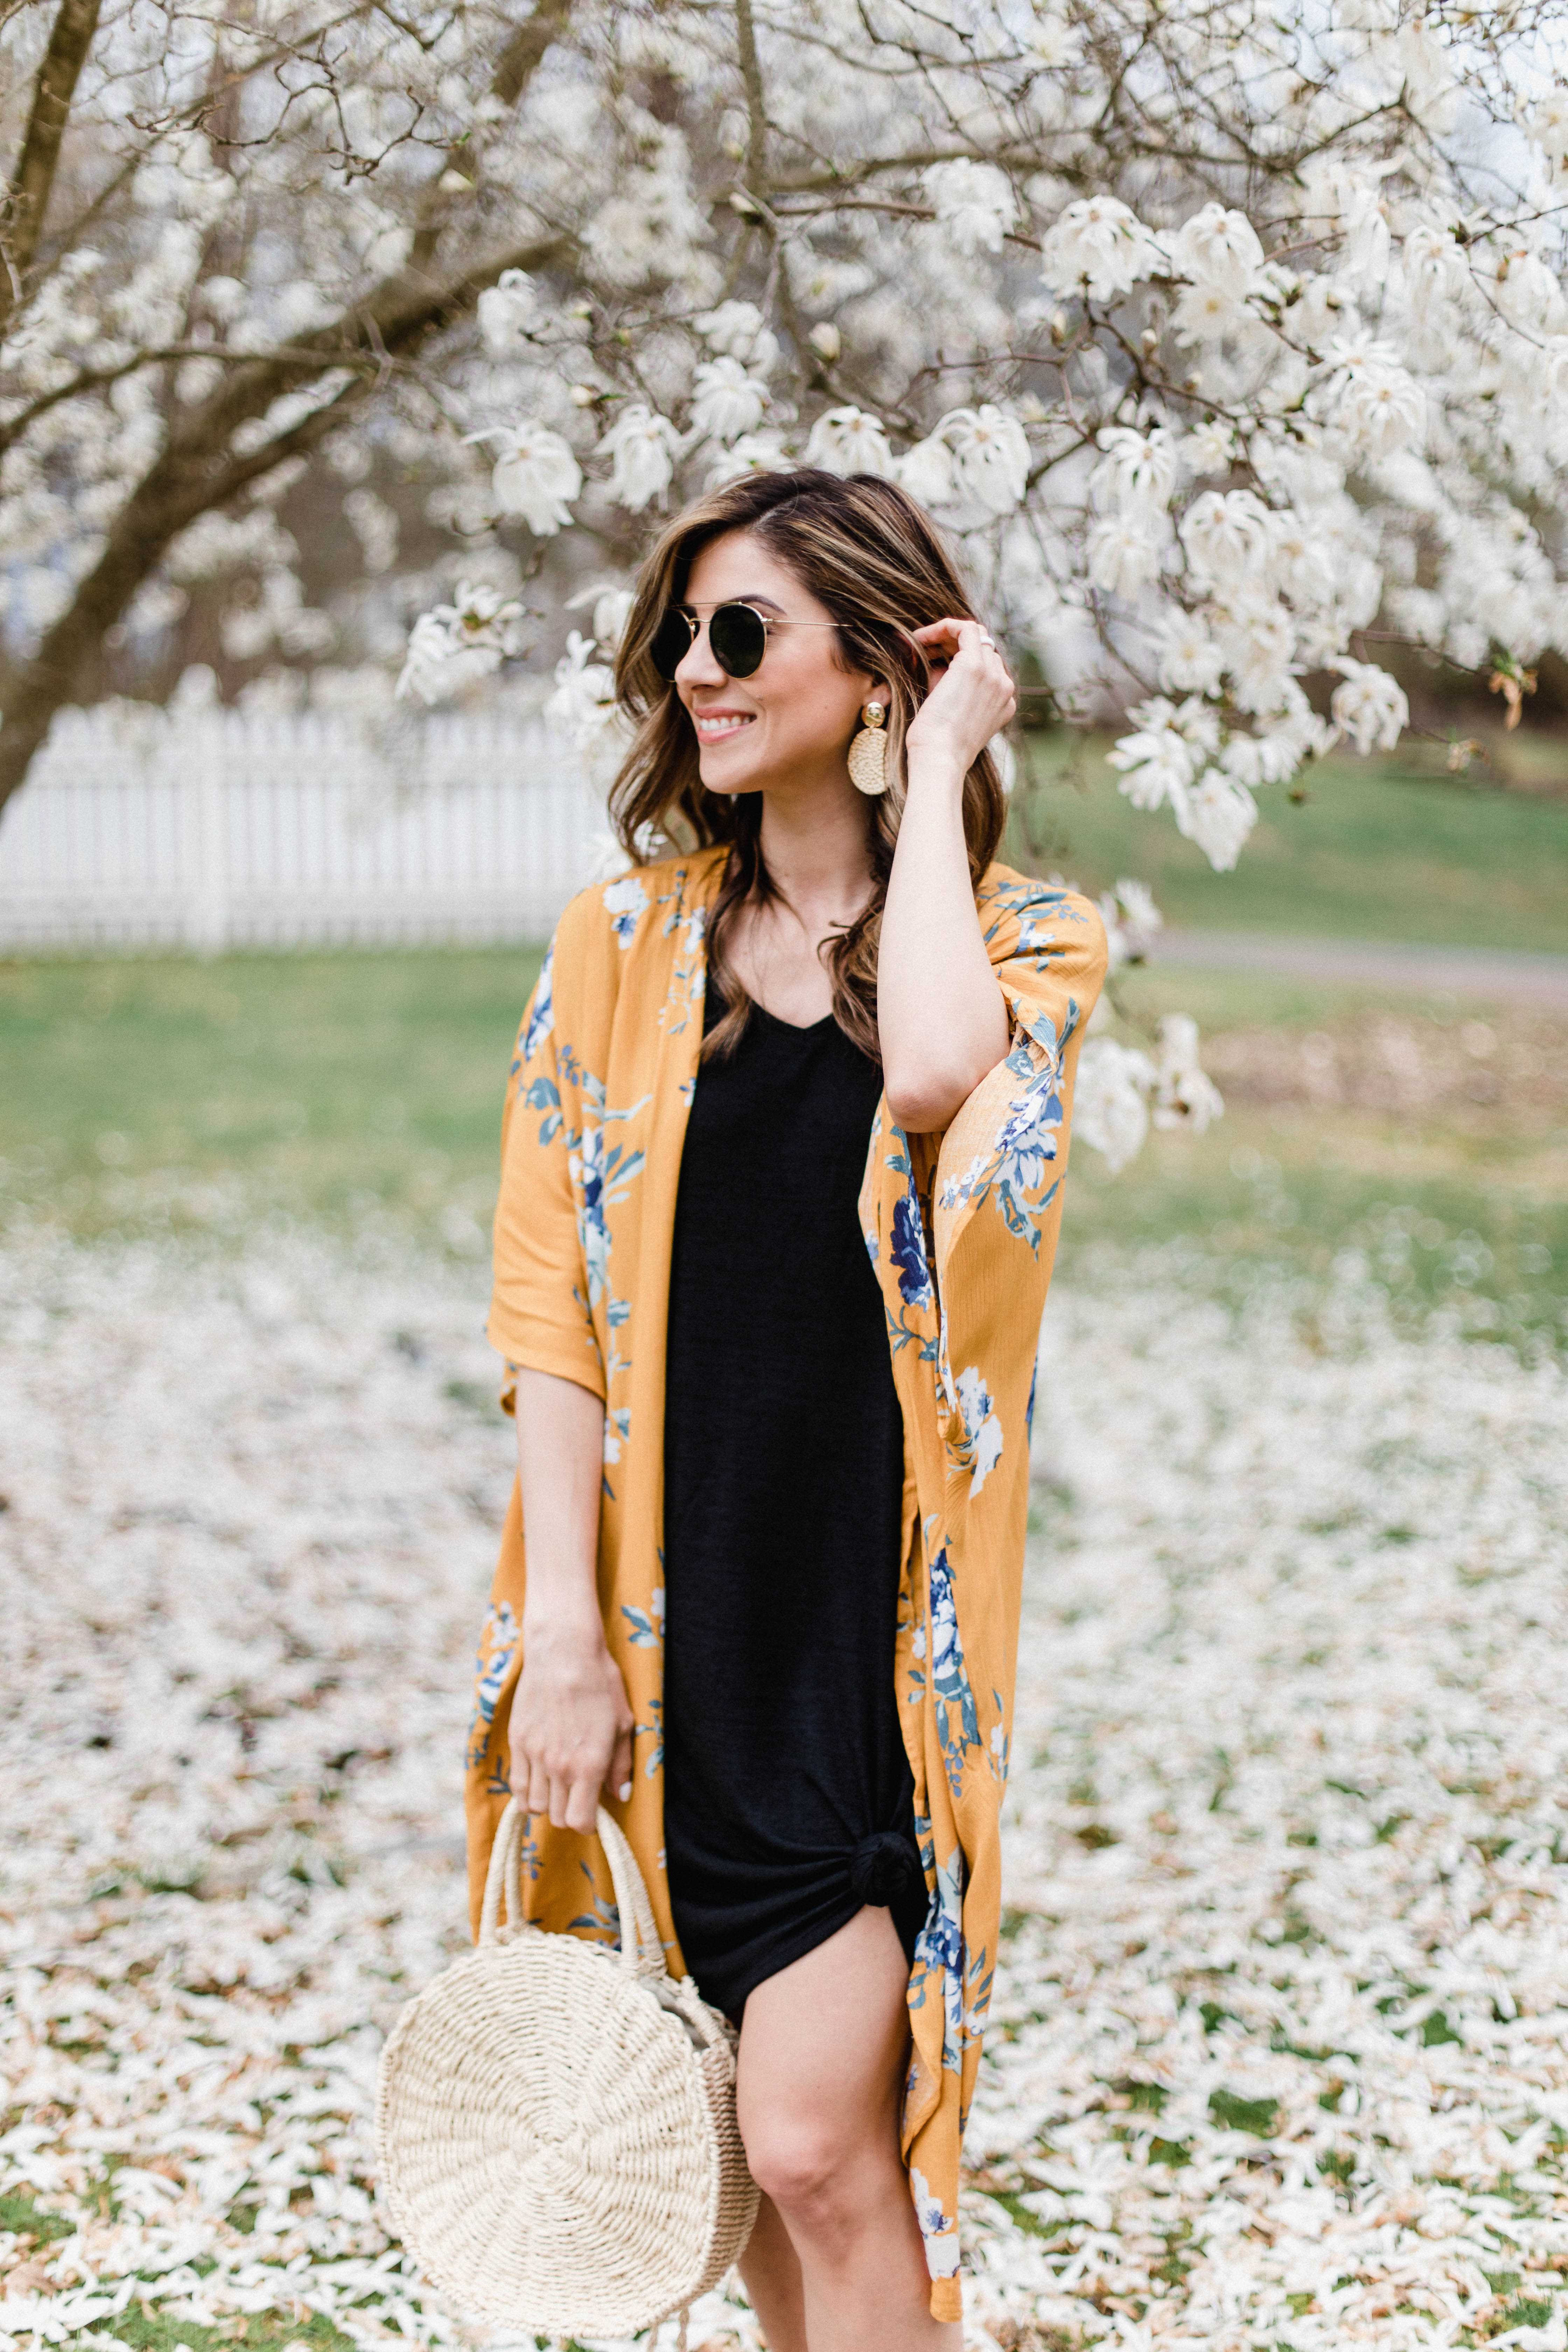 Connecticut life and style blogger Lauren McBride shares an easy spring outfit idea featuring a t-shirt dress worn with a kimono.